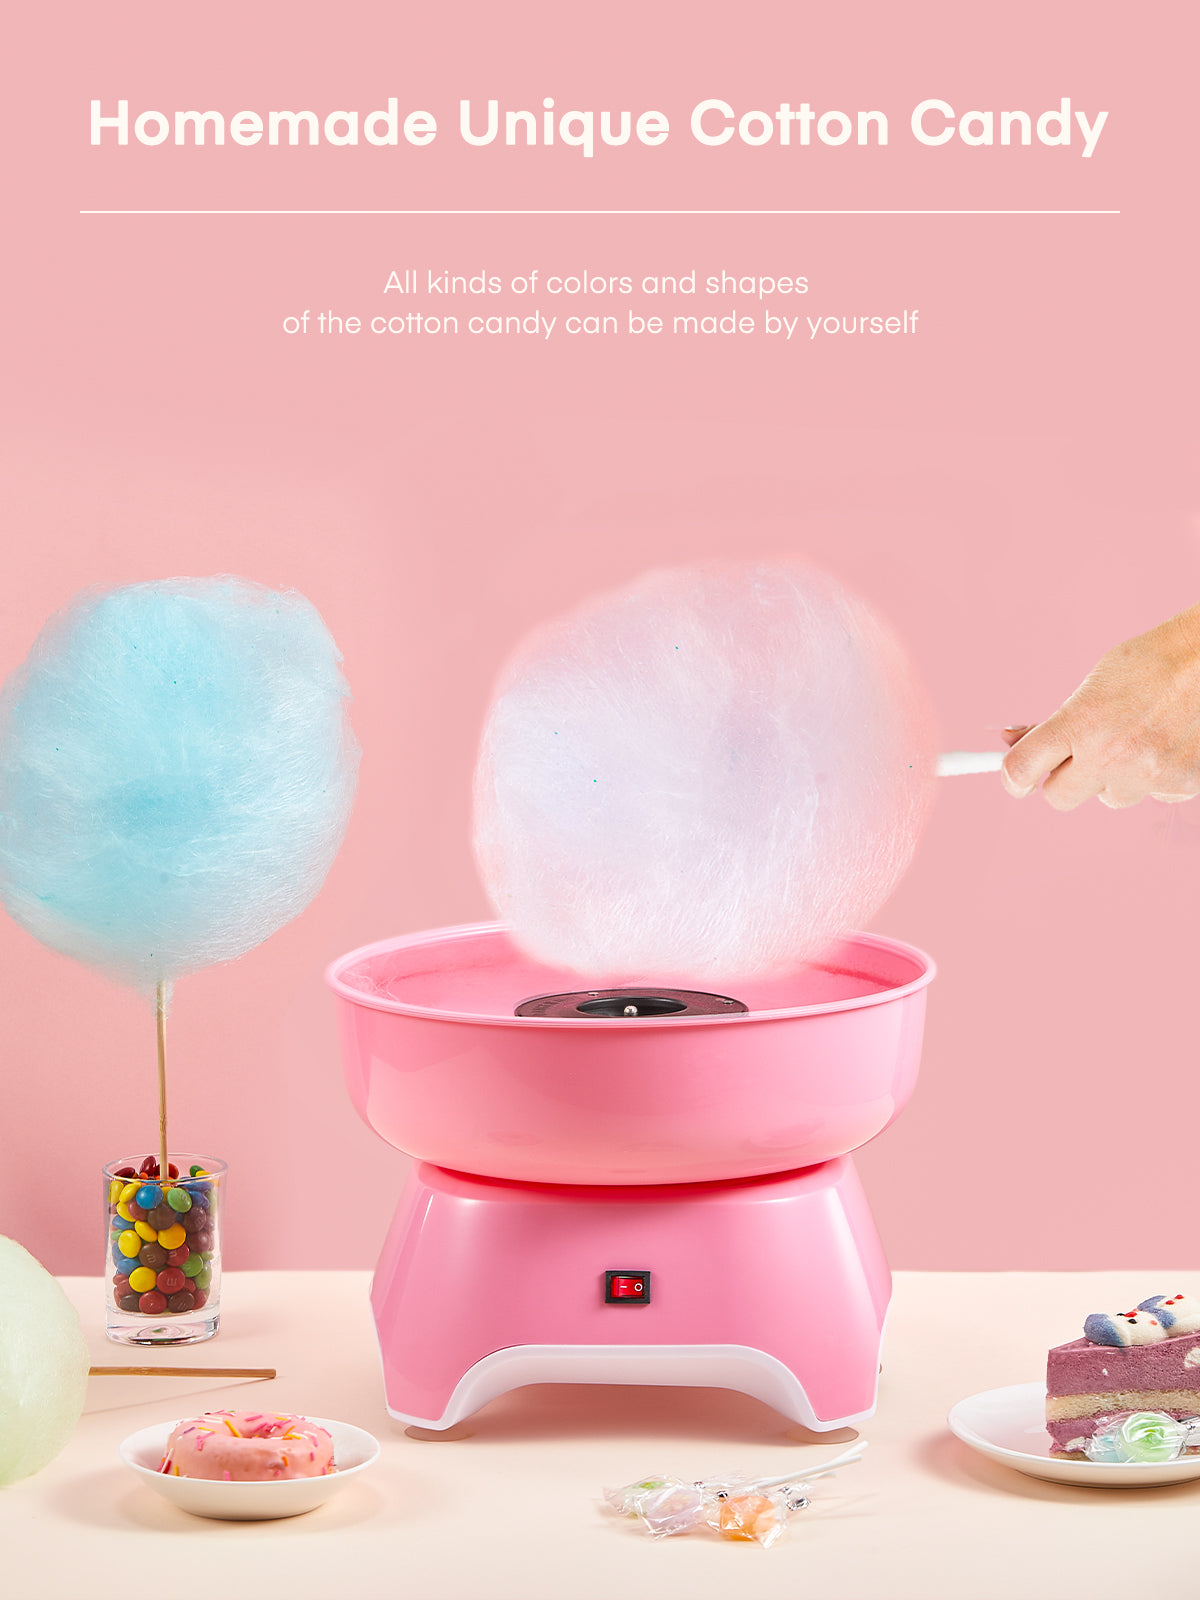 Candy Floss Maker FOHERE Cotton Candy Machine with Wooden Sticks and Sugar Scoop, Easy to Use, Gift for Children's Birthday Party